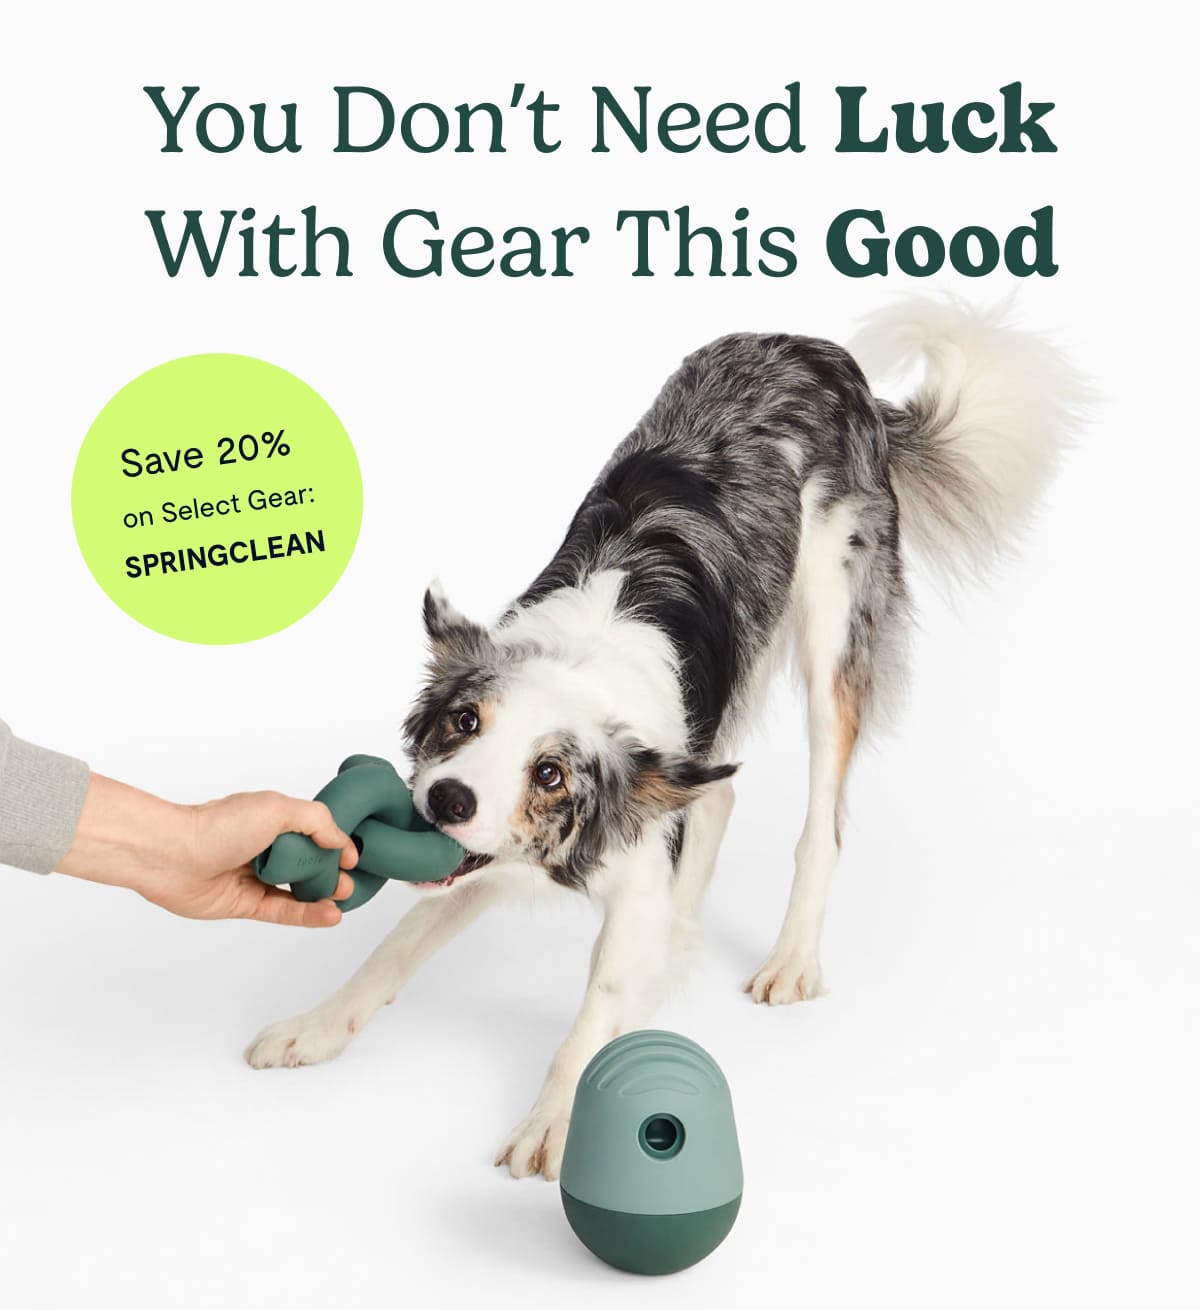 You don't need luck with gear this good! Save 20% on Select Gear: SPRINGCLEAN